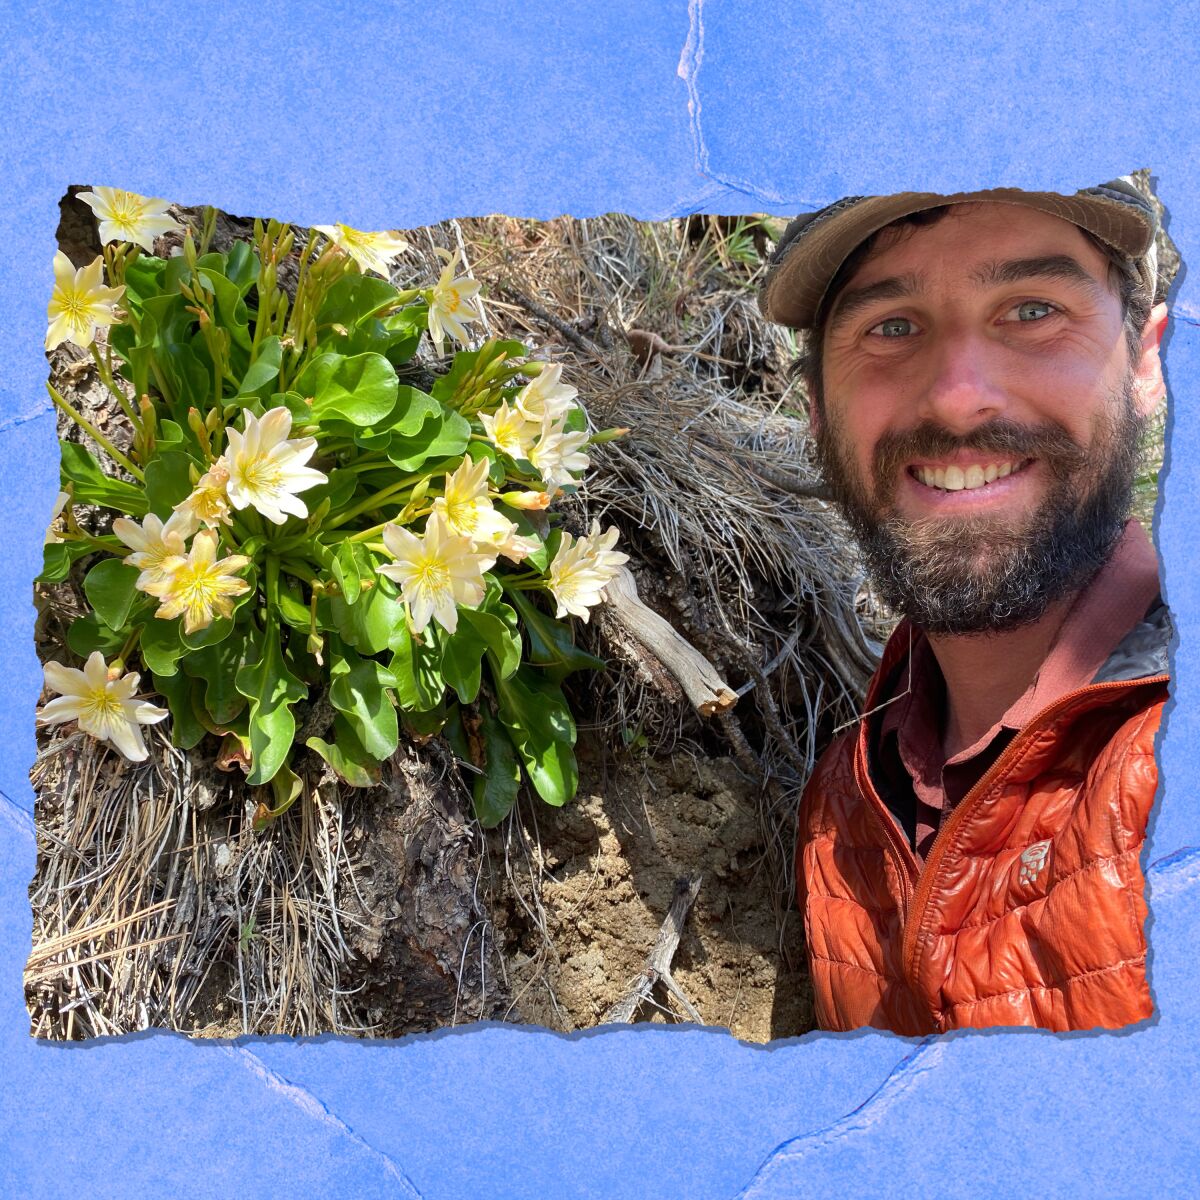 A man with a beard smiles as he poses for a photo beside a plant with yellow and white flowers.